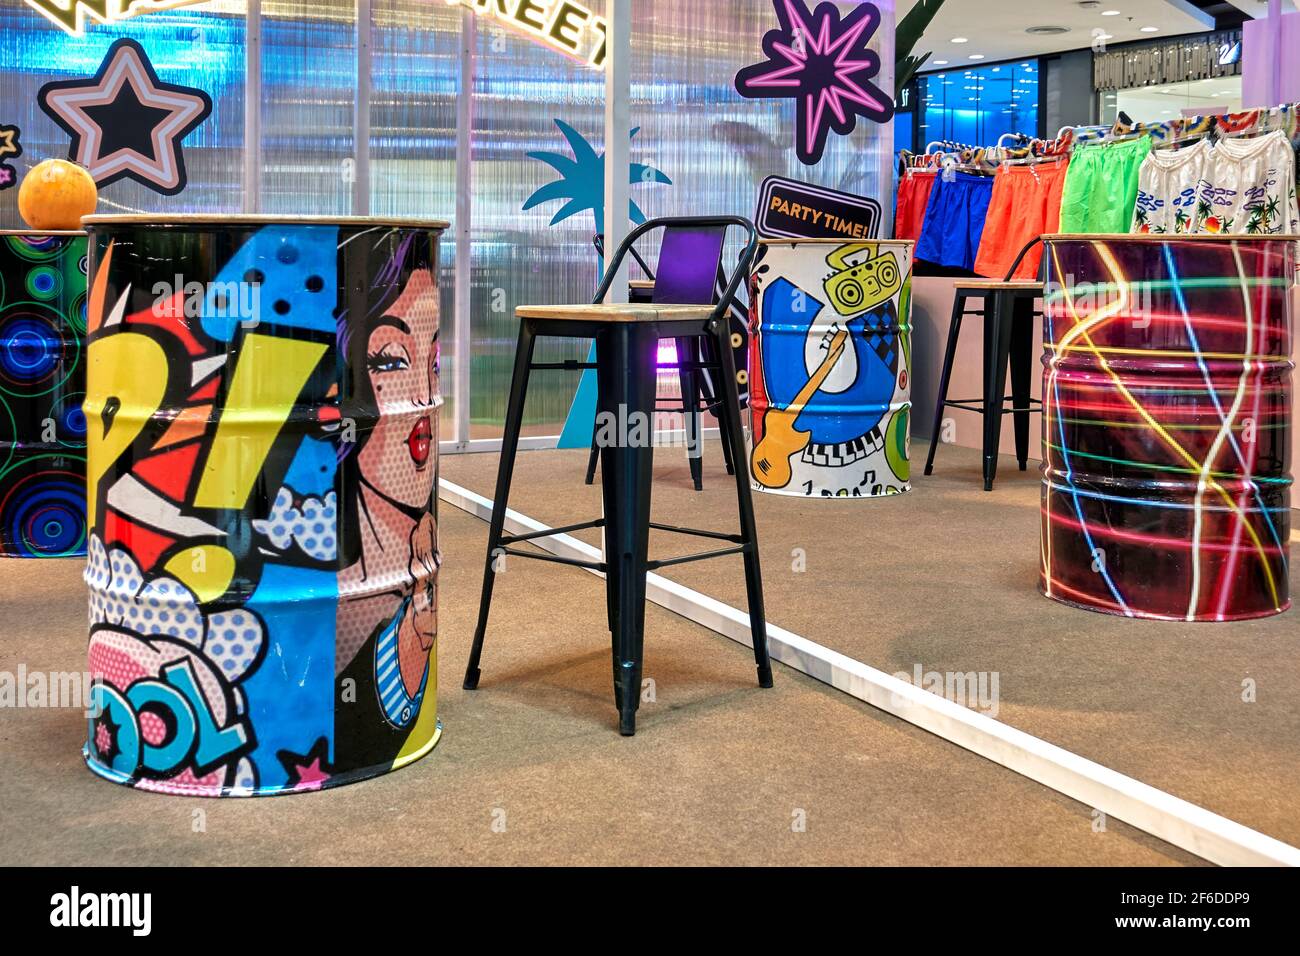 Comic book and pop art furnishing featuring colourful oil drums in a teen cafe environment Stock Photo